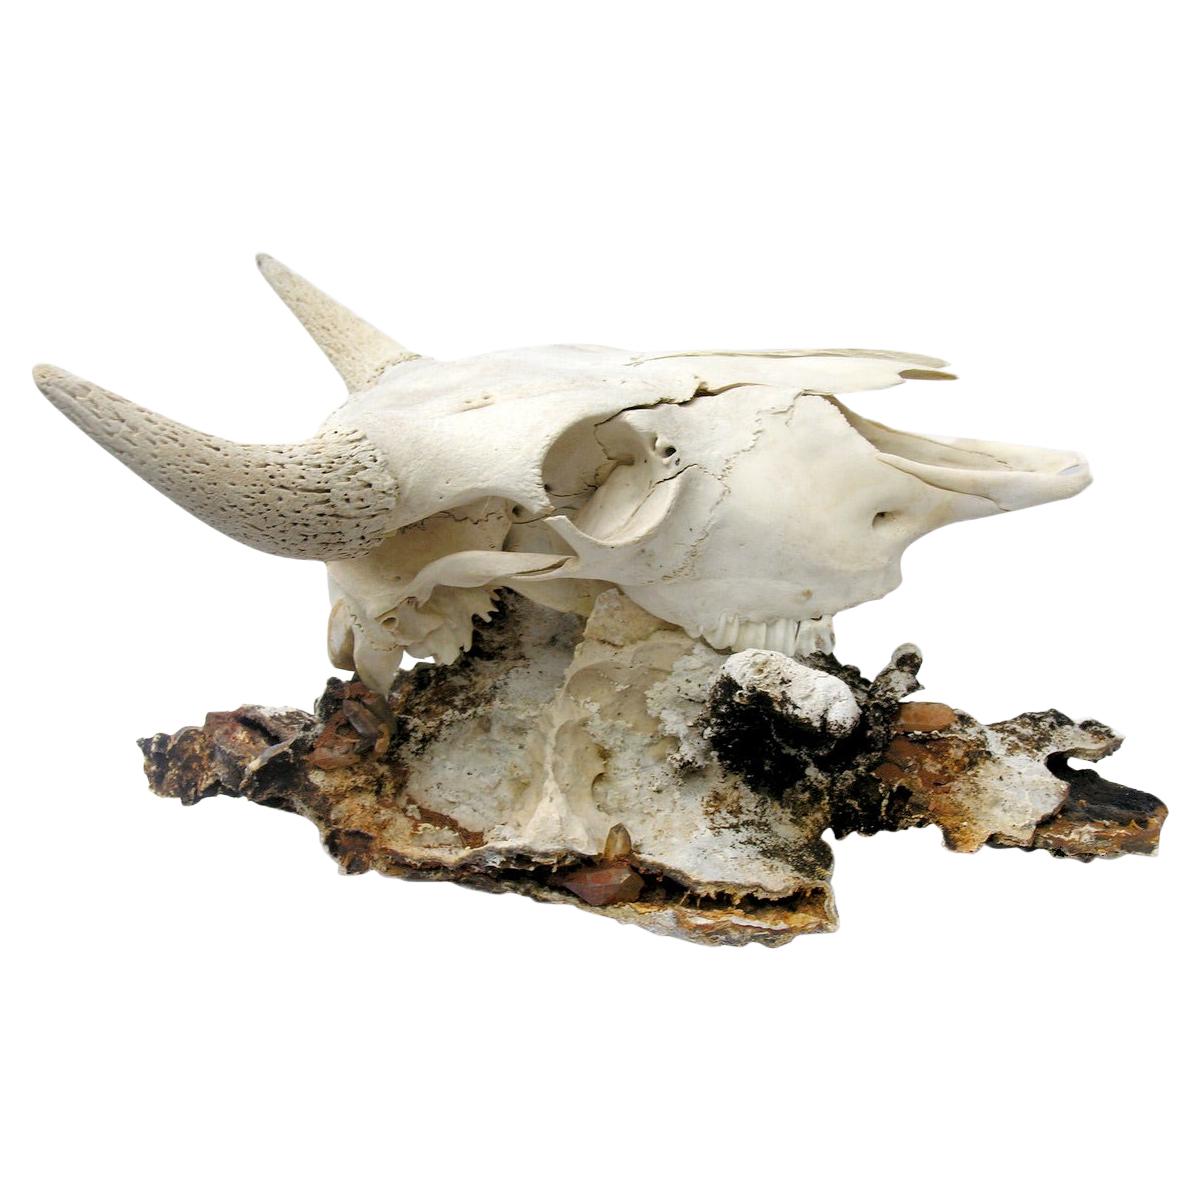 Bison Skull on a Fossil Agate Coral Decorated with Crystal Quartz Points